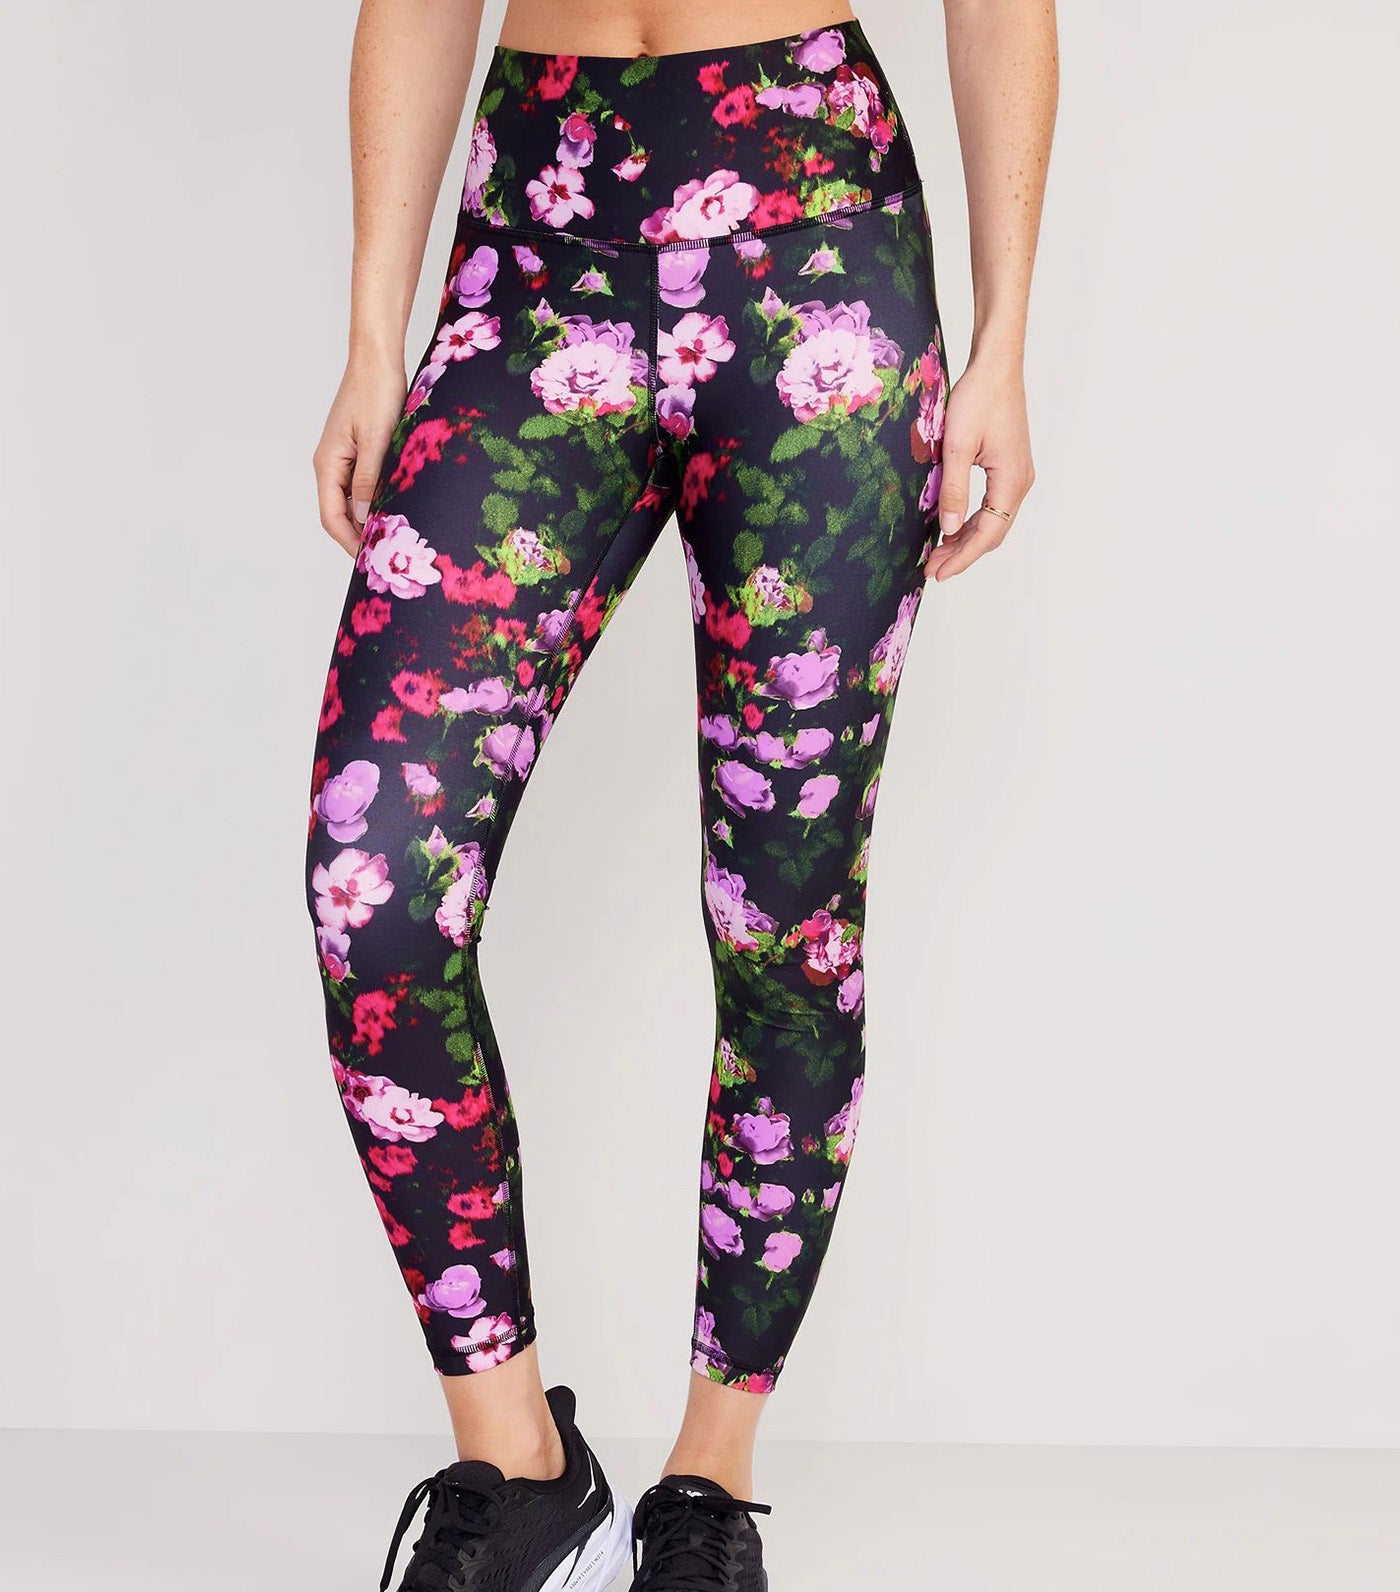 High-Waisted PowerSoft 7/8-Length Leggings for Women Purple Floral